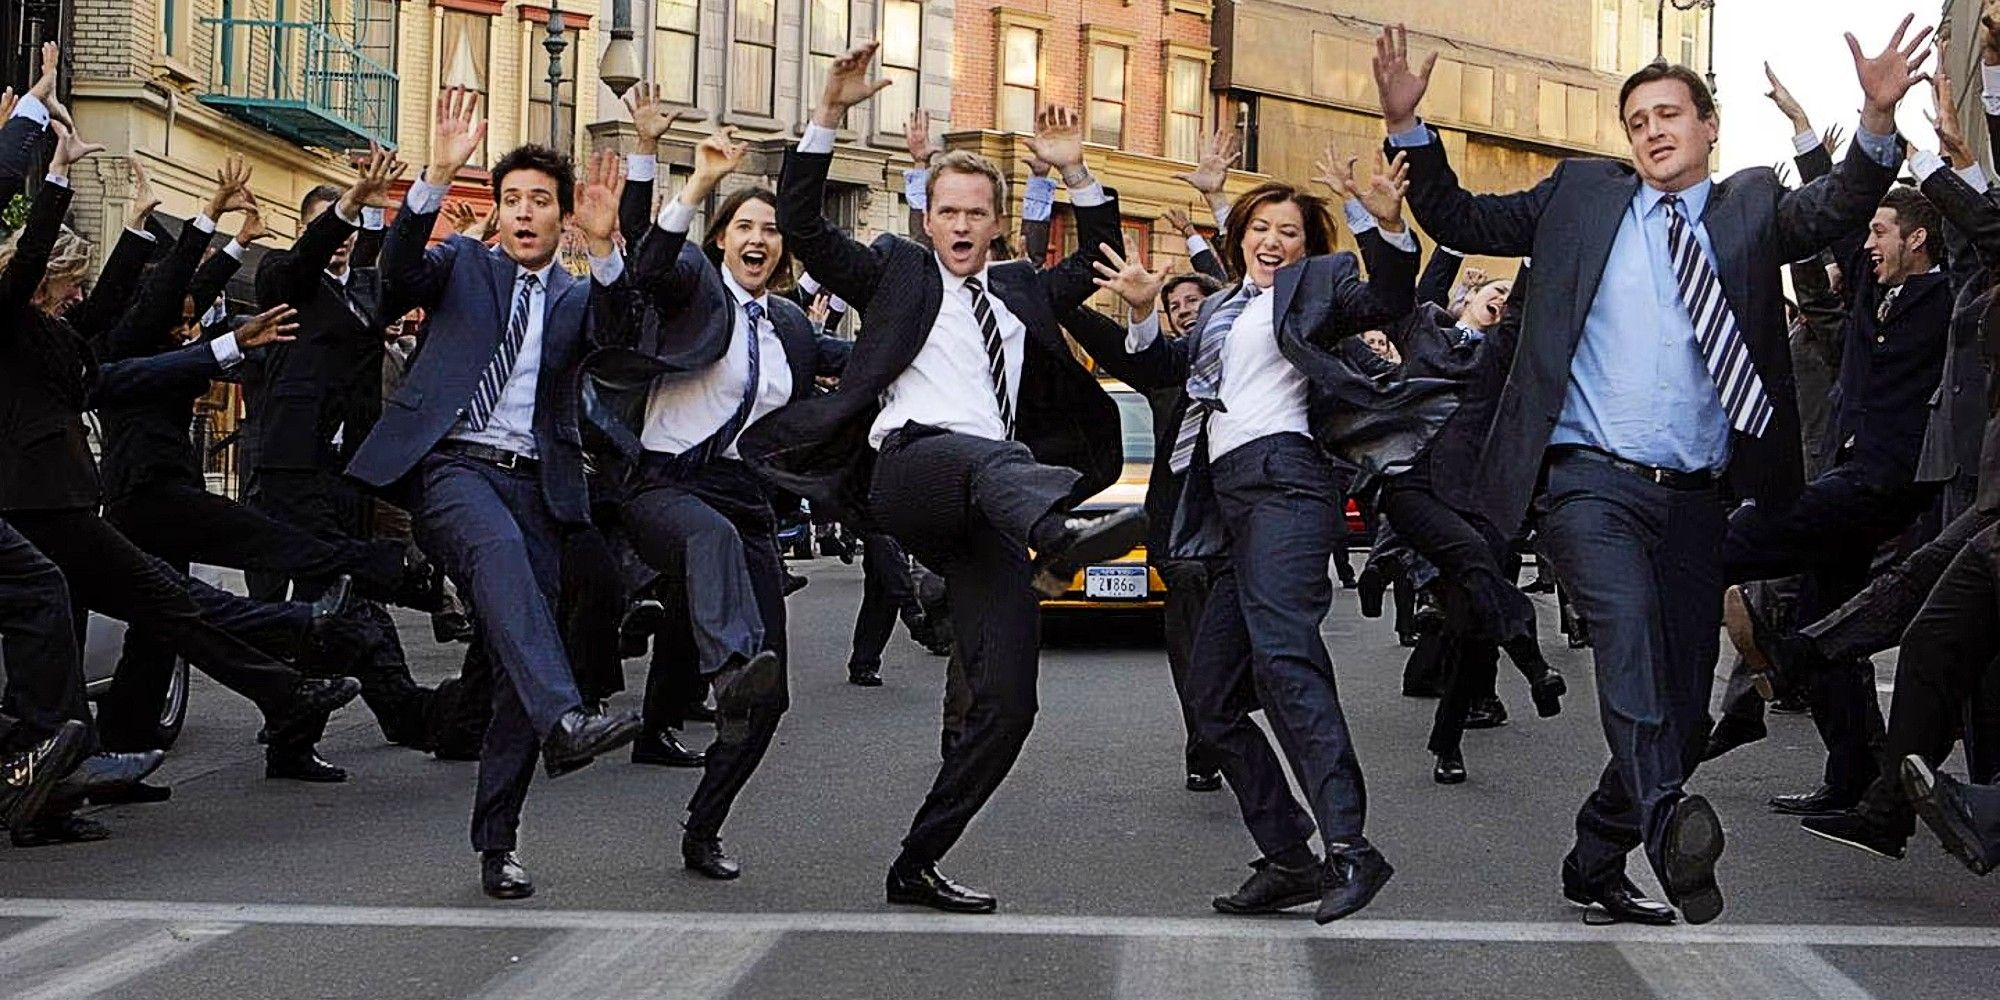 Ted Mosby, Robin Scherbatsky, Barney Stinson, Lily Aldrin, and Marshall Erikson dancing in suits in "How I Met Your Mother"